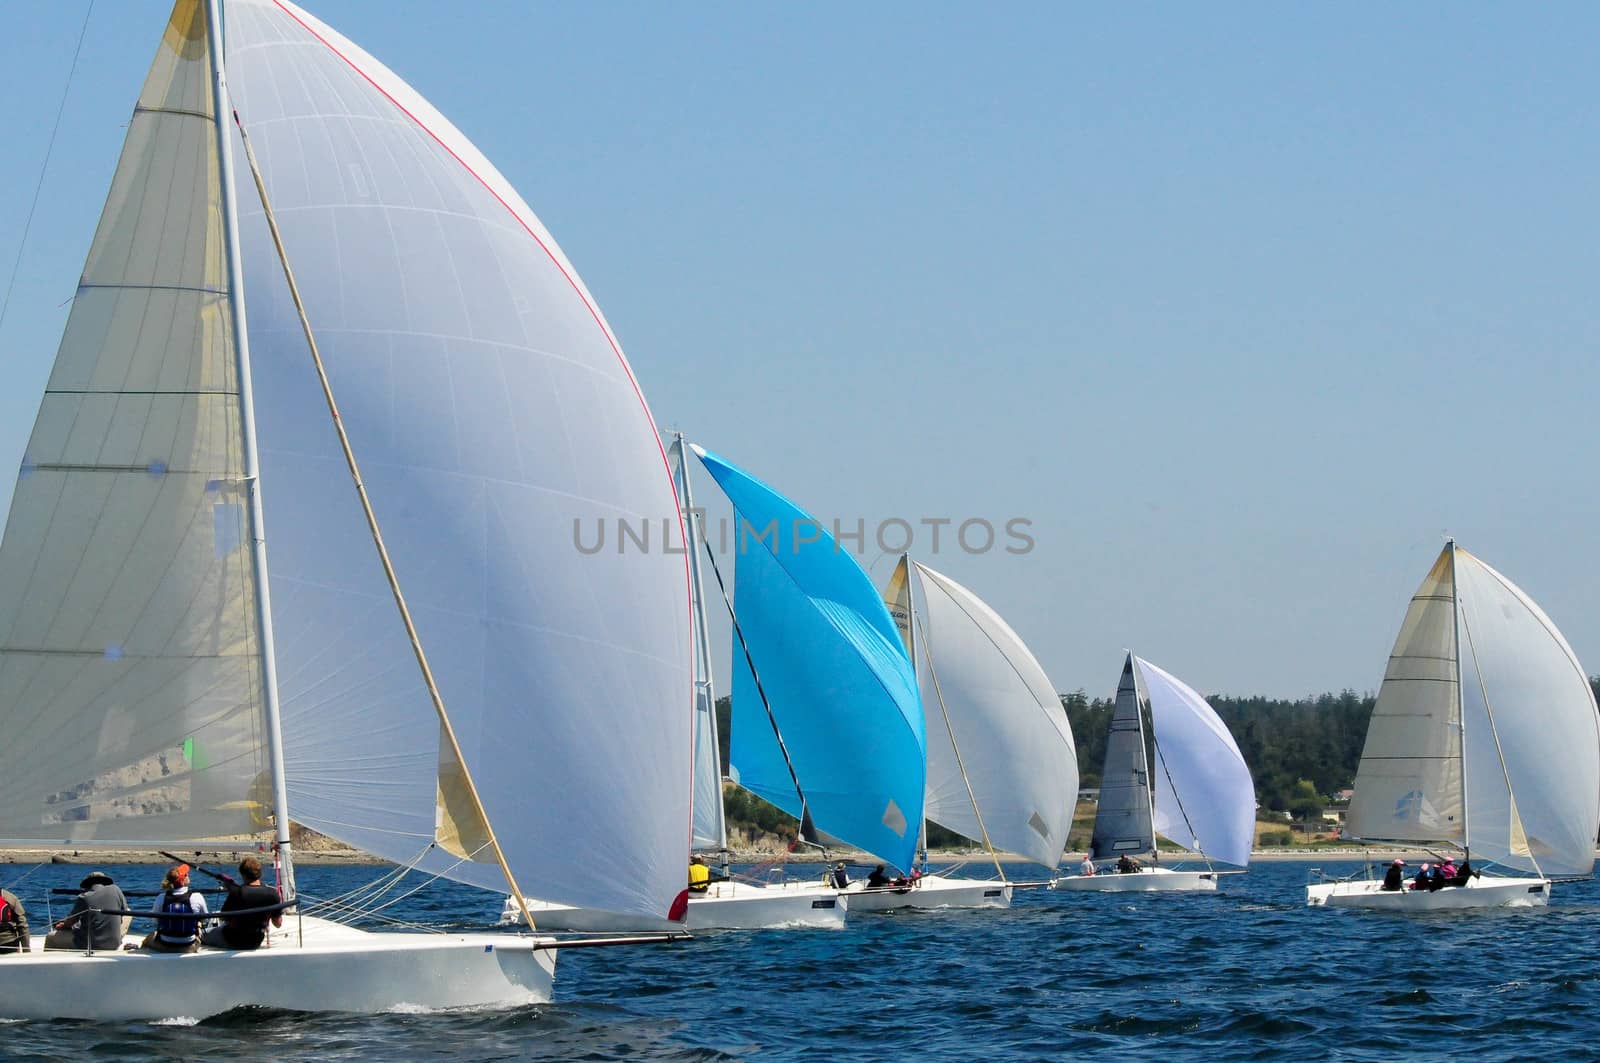 Sailboat Racing on Whidbey Island, WA by cestes001